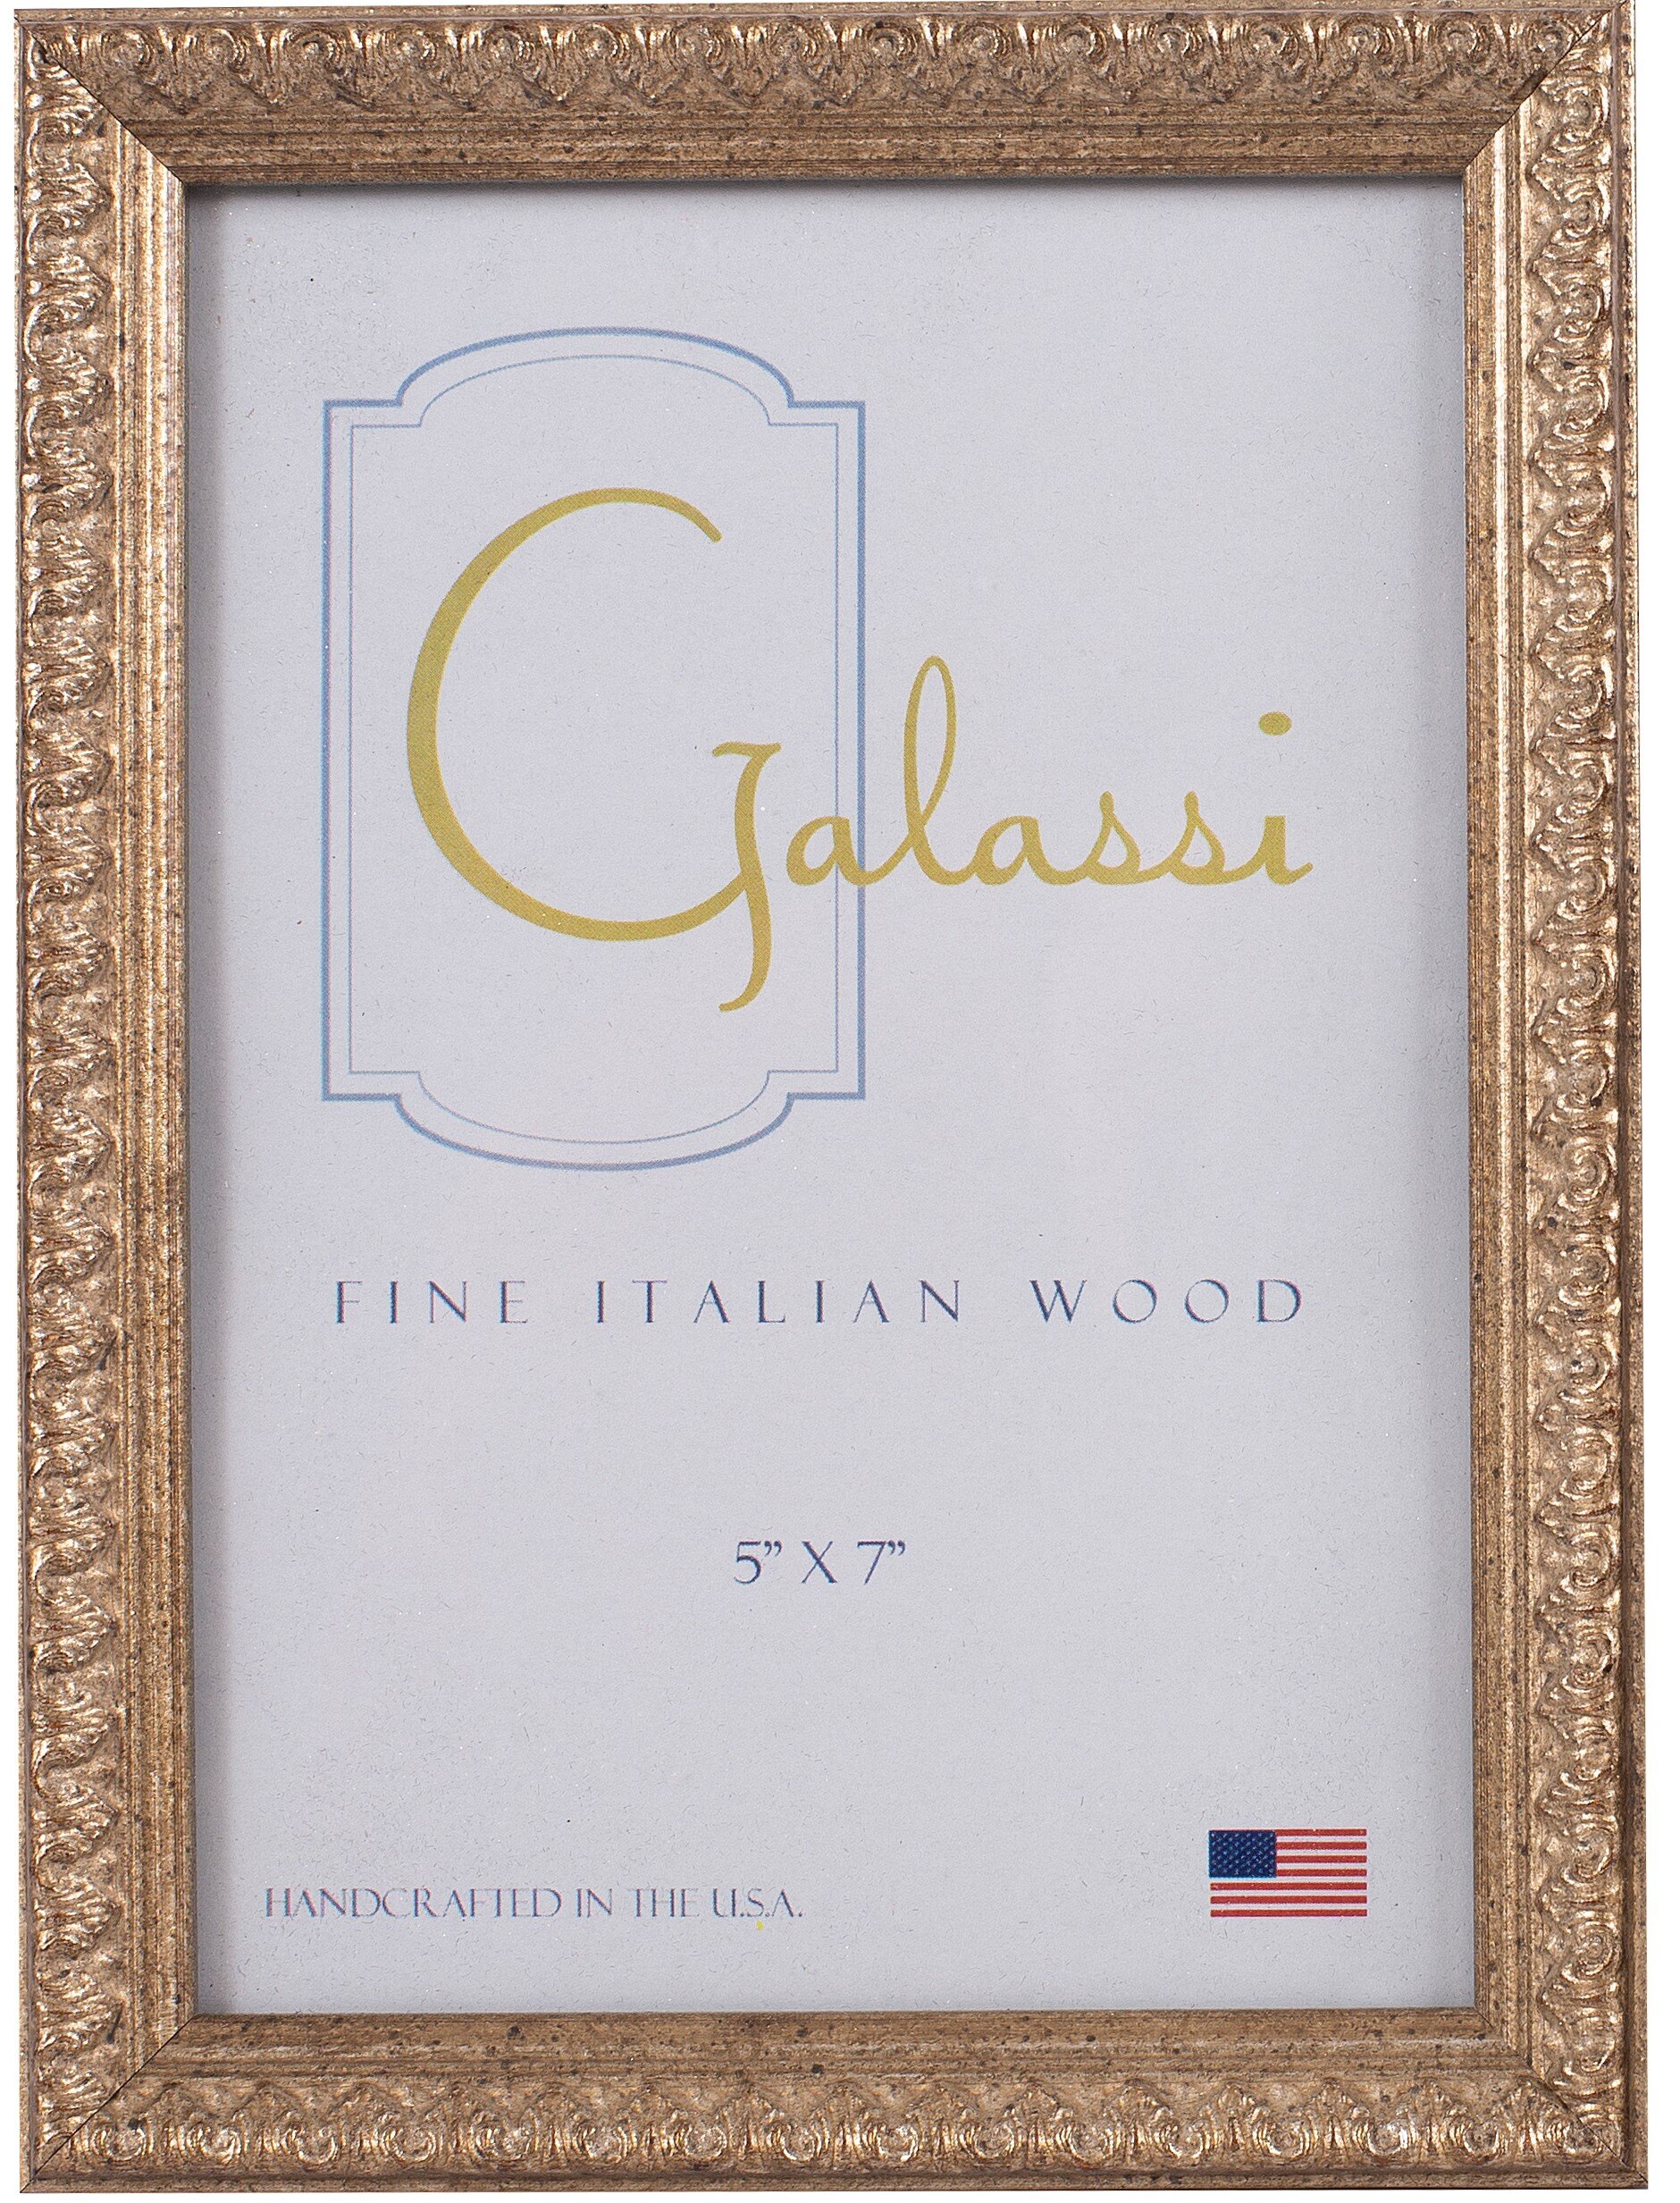 F.G Galassi Handcrafted Fine italian Wood 5x7  Frame  Gold Made USA 